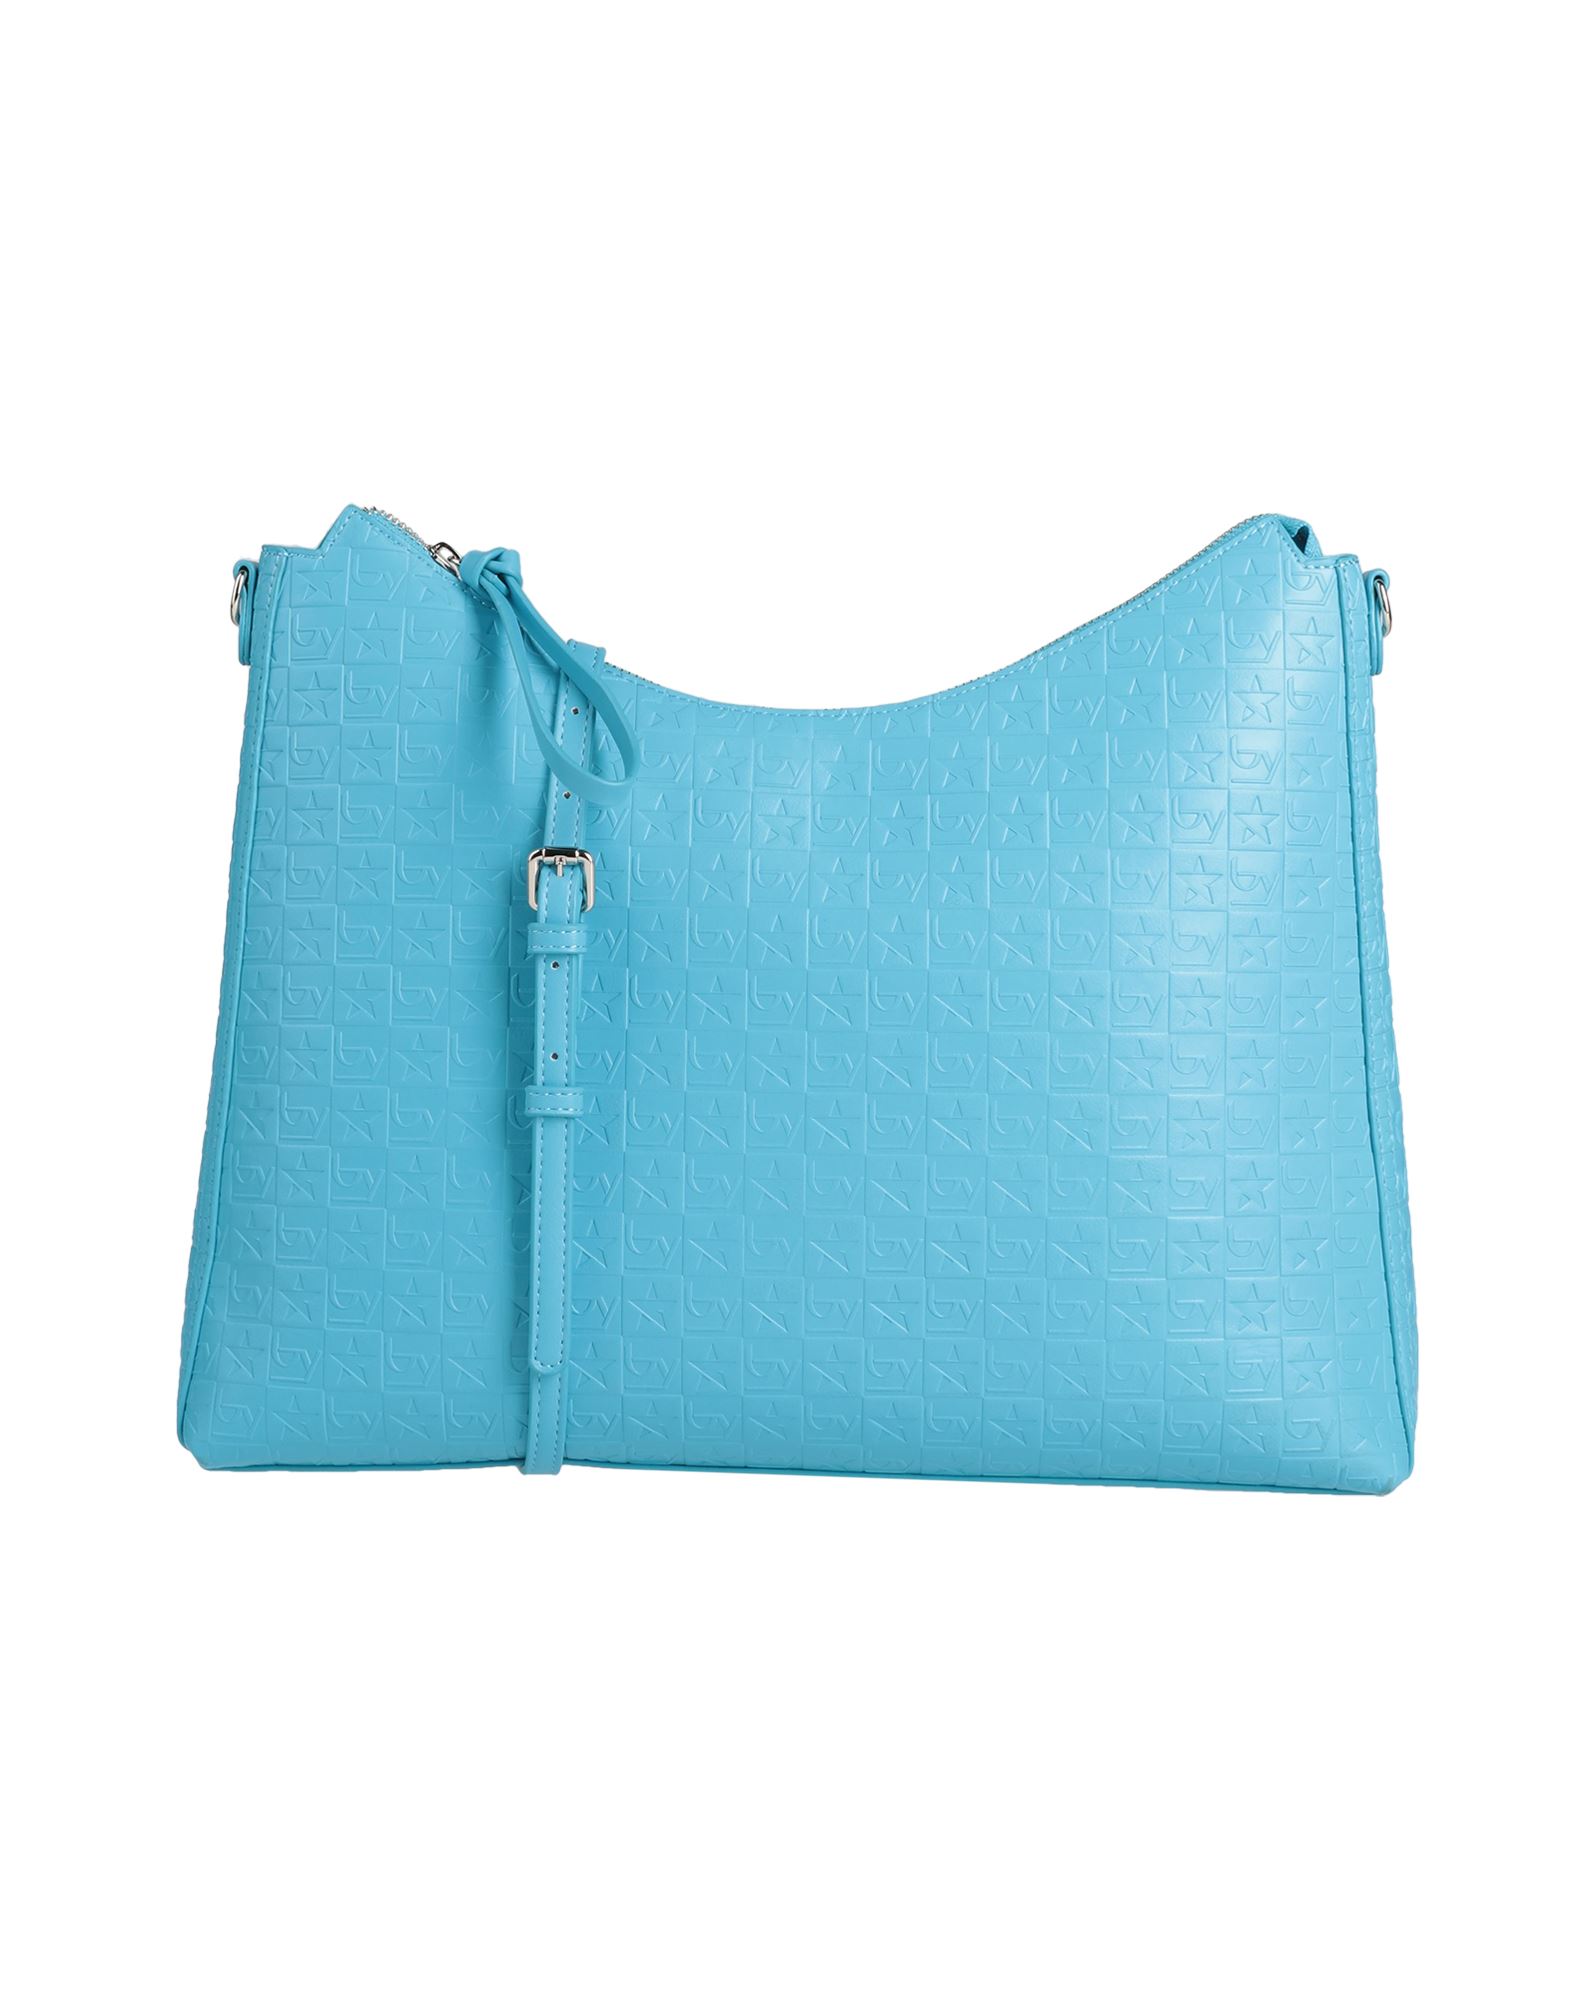 Byblos Handbags In Turquoise